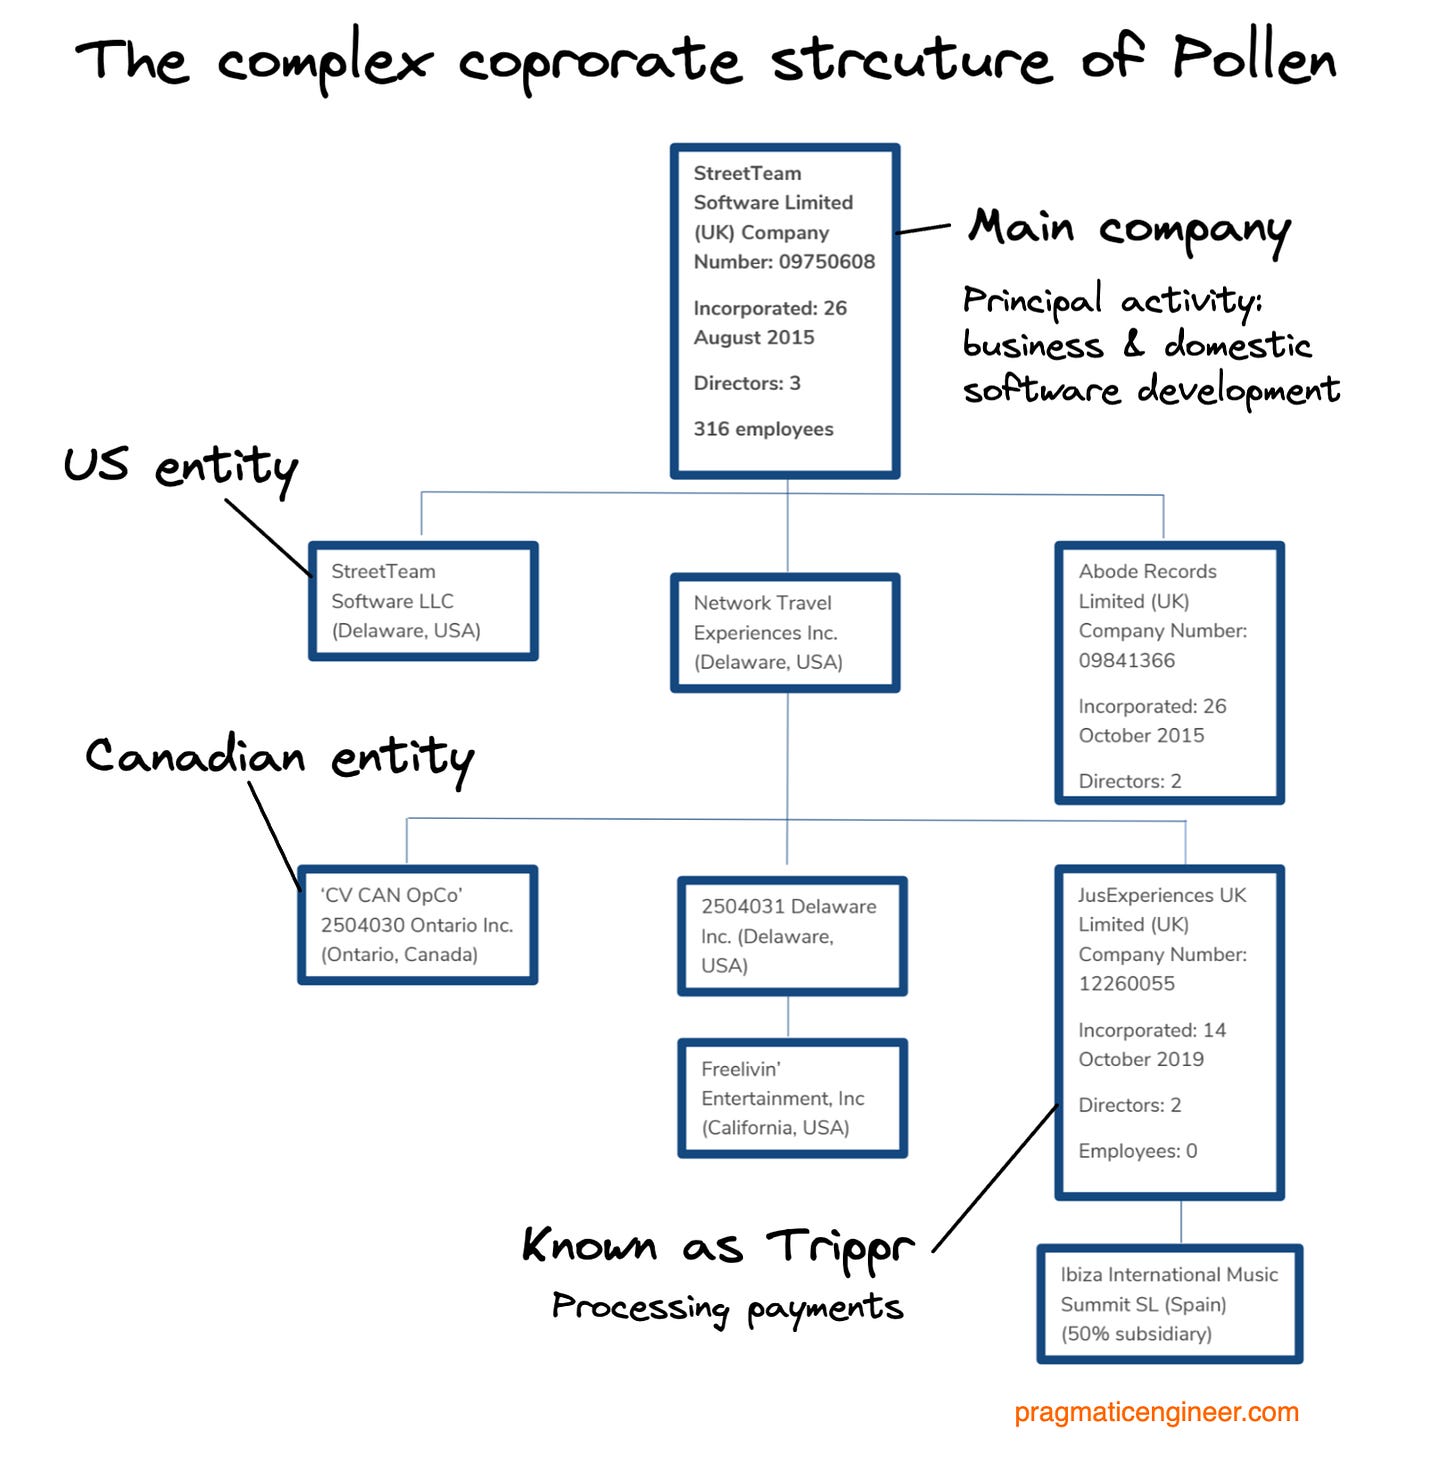 The corporate structure of Pollen. Source of some of the graphics: Statement of Proposals document by Kroll